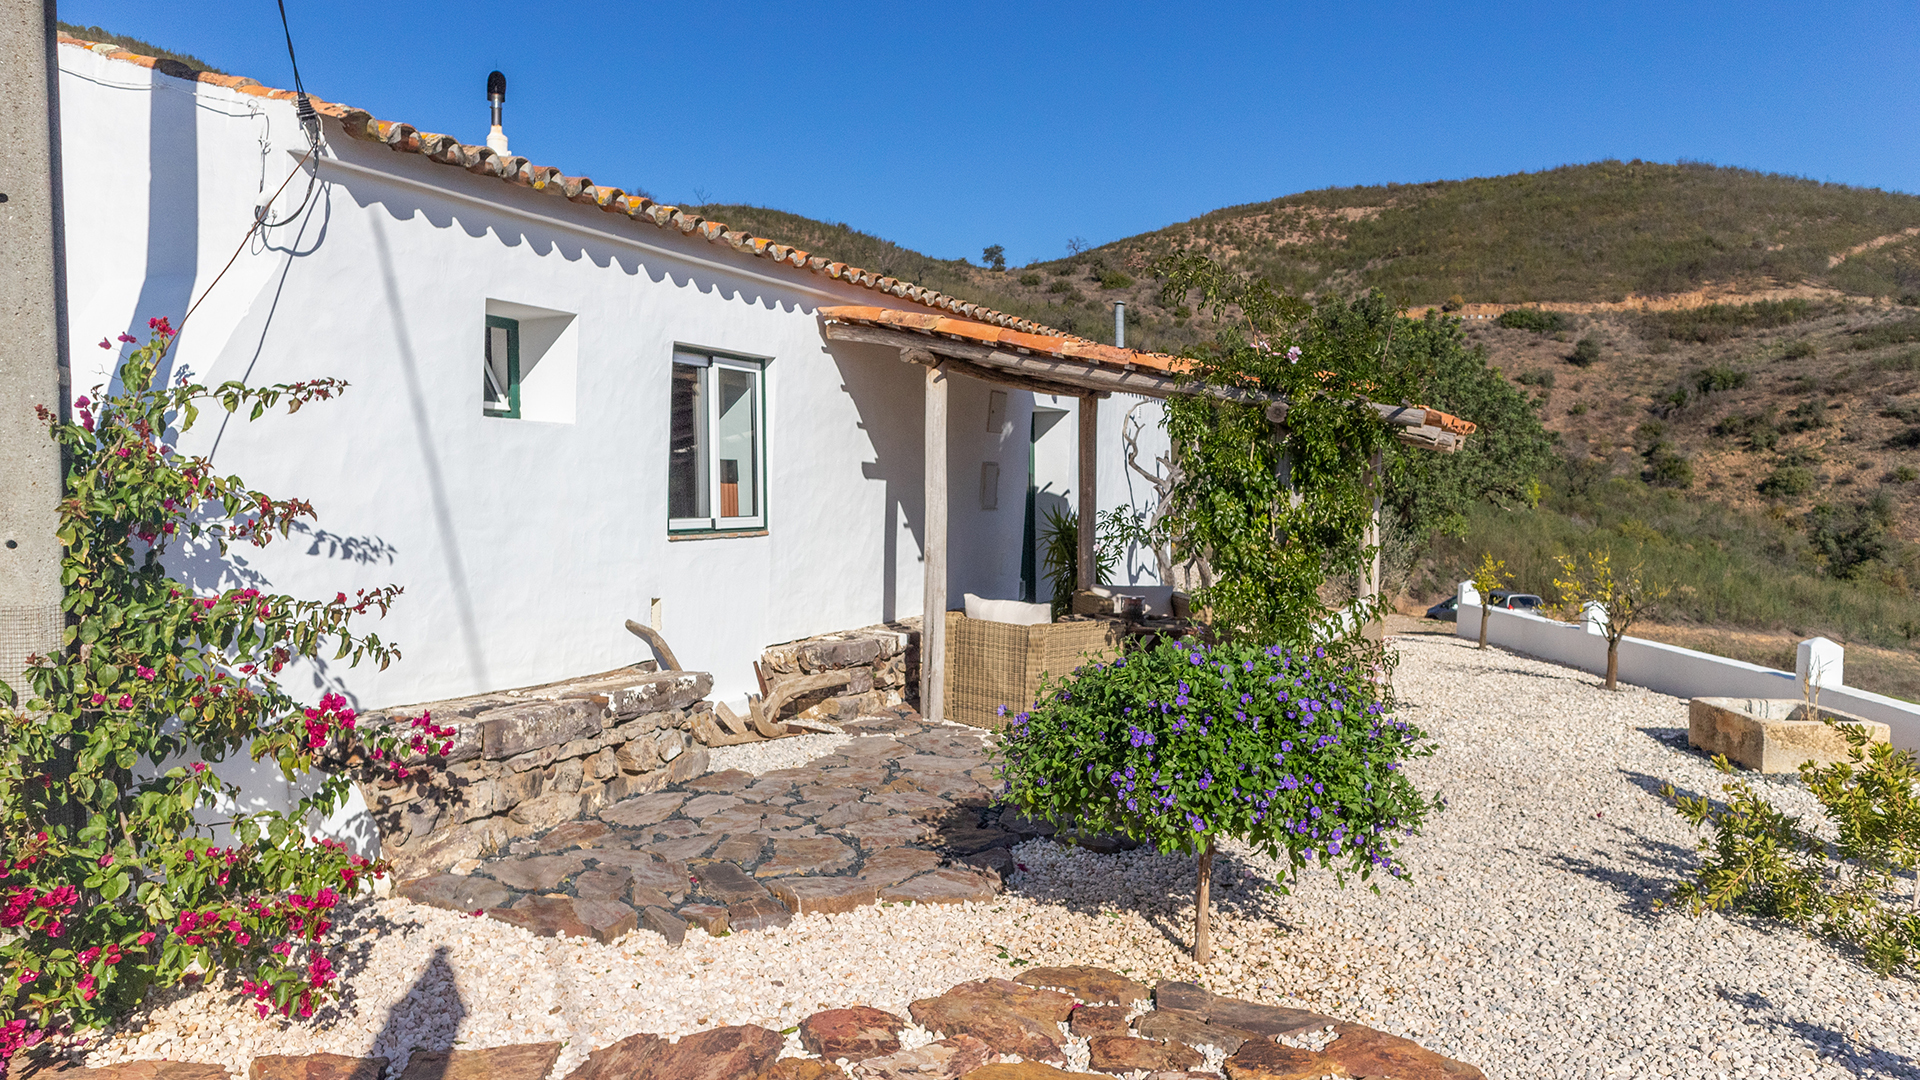 Pretty 2 Bedroom Country House with Land and Water near Alferce, Monchique | LG1871 Cosy 2-bedroom home in peaceful and scenic surroundings with fertile land, orange grove and a river nearby. Just a short drive to all amenities in Monchique.